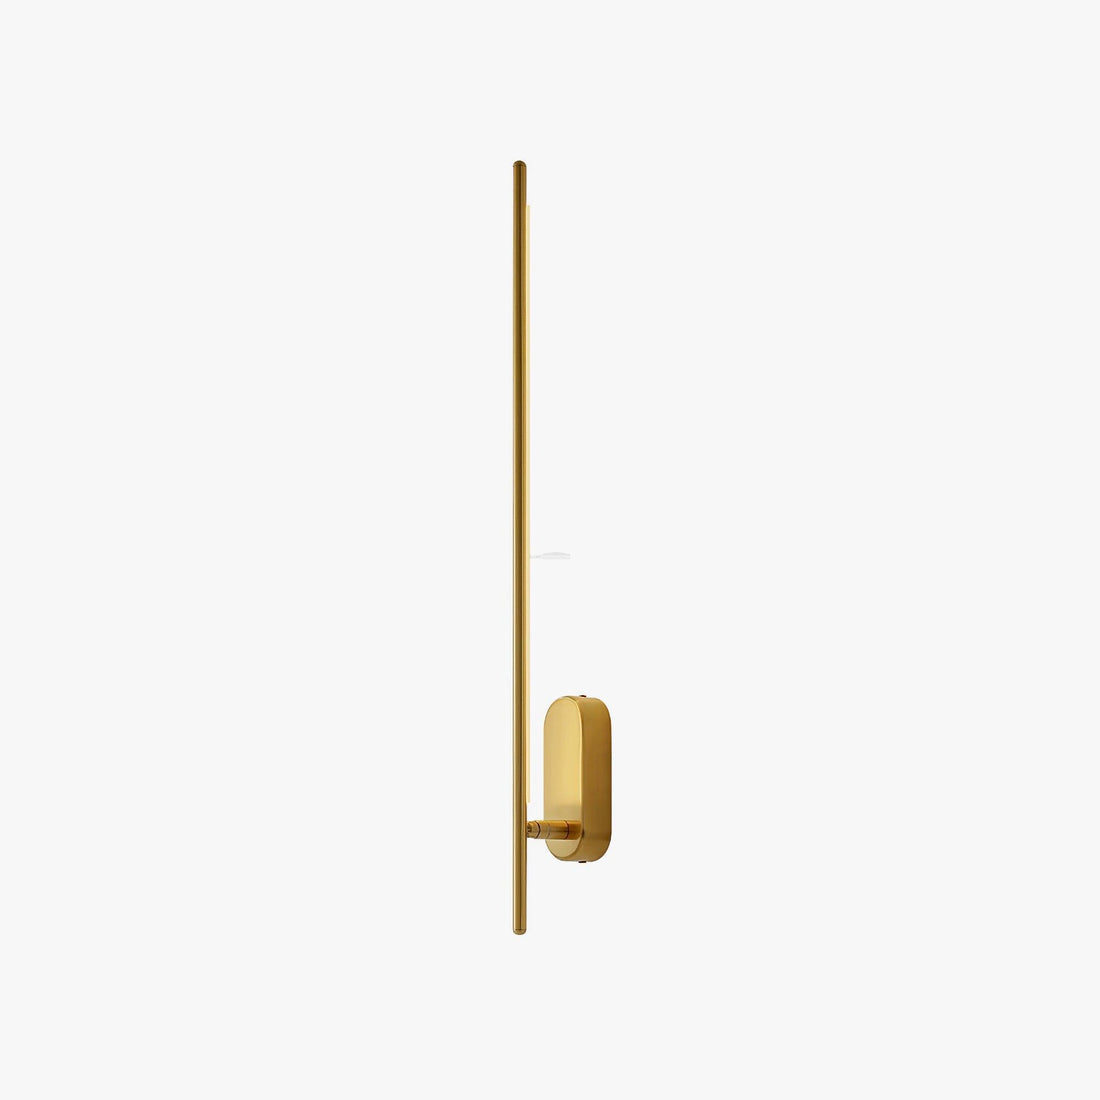 Stick Shaped Metal Wall Sconce